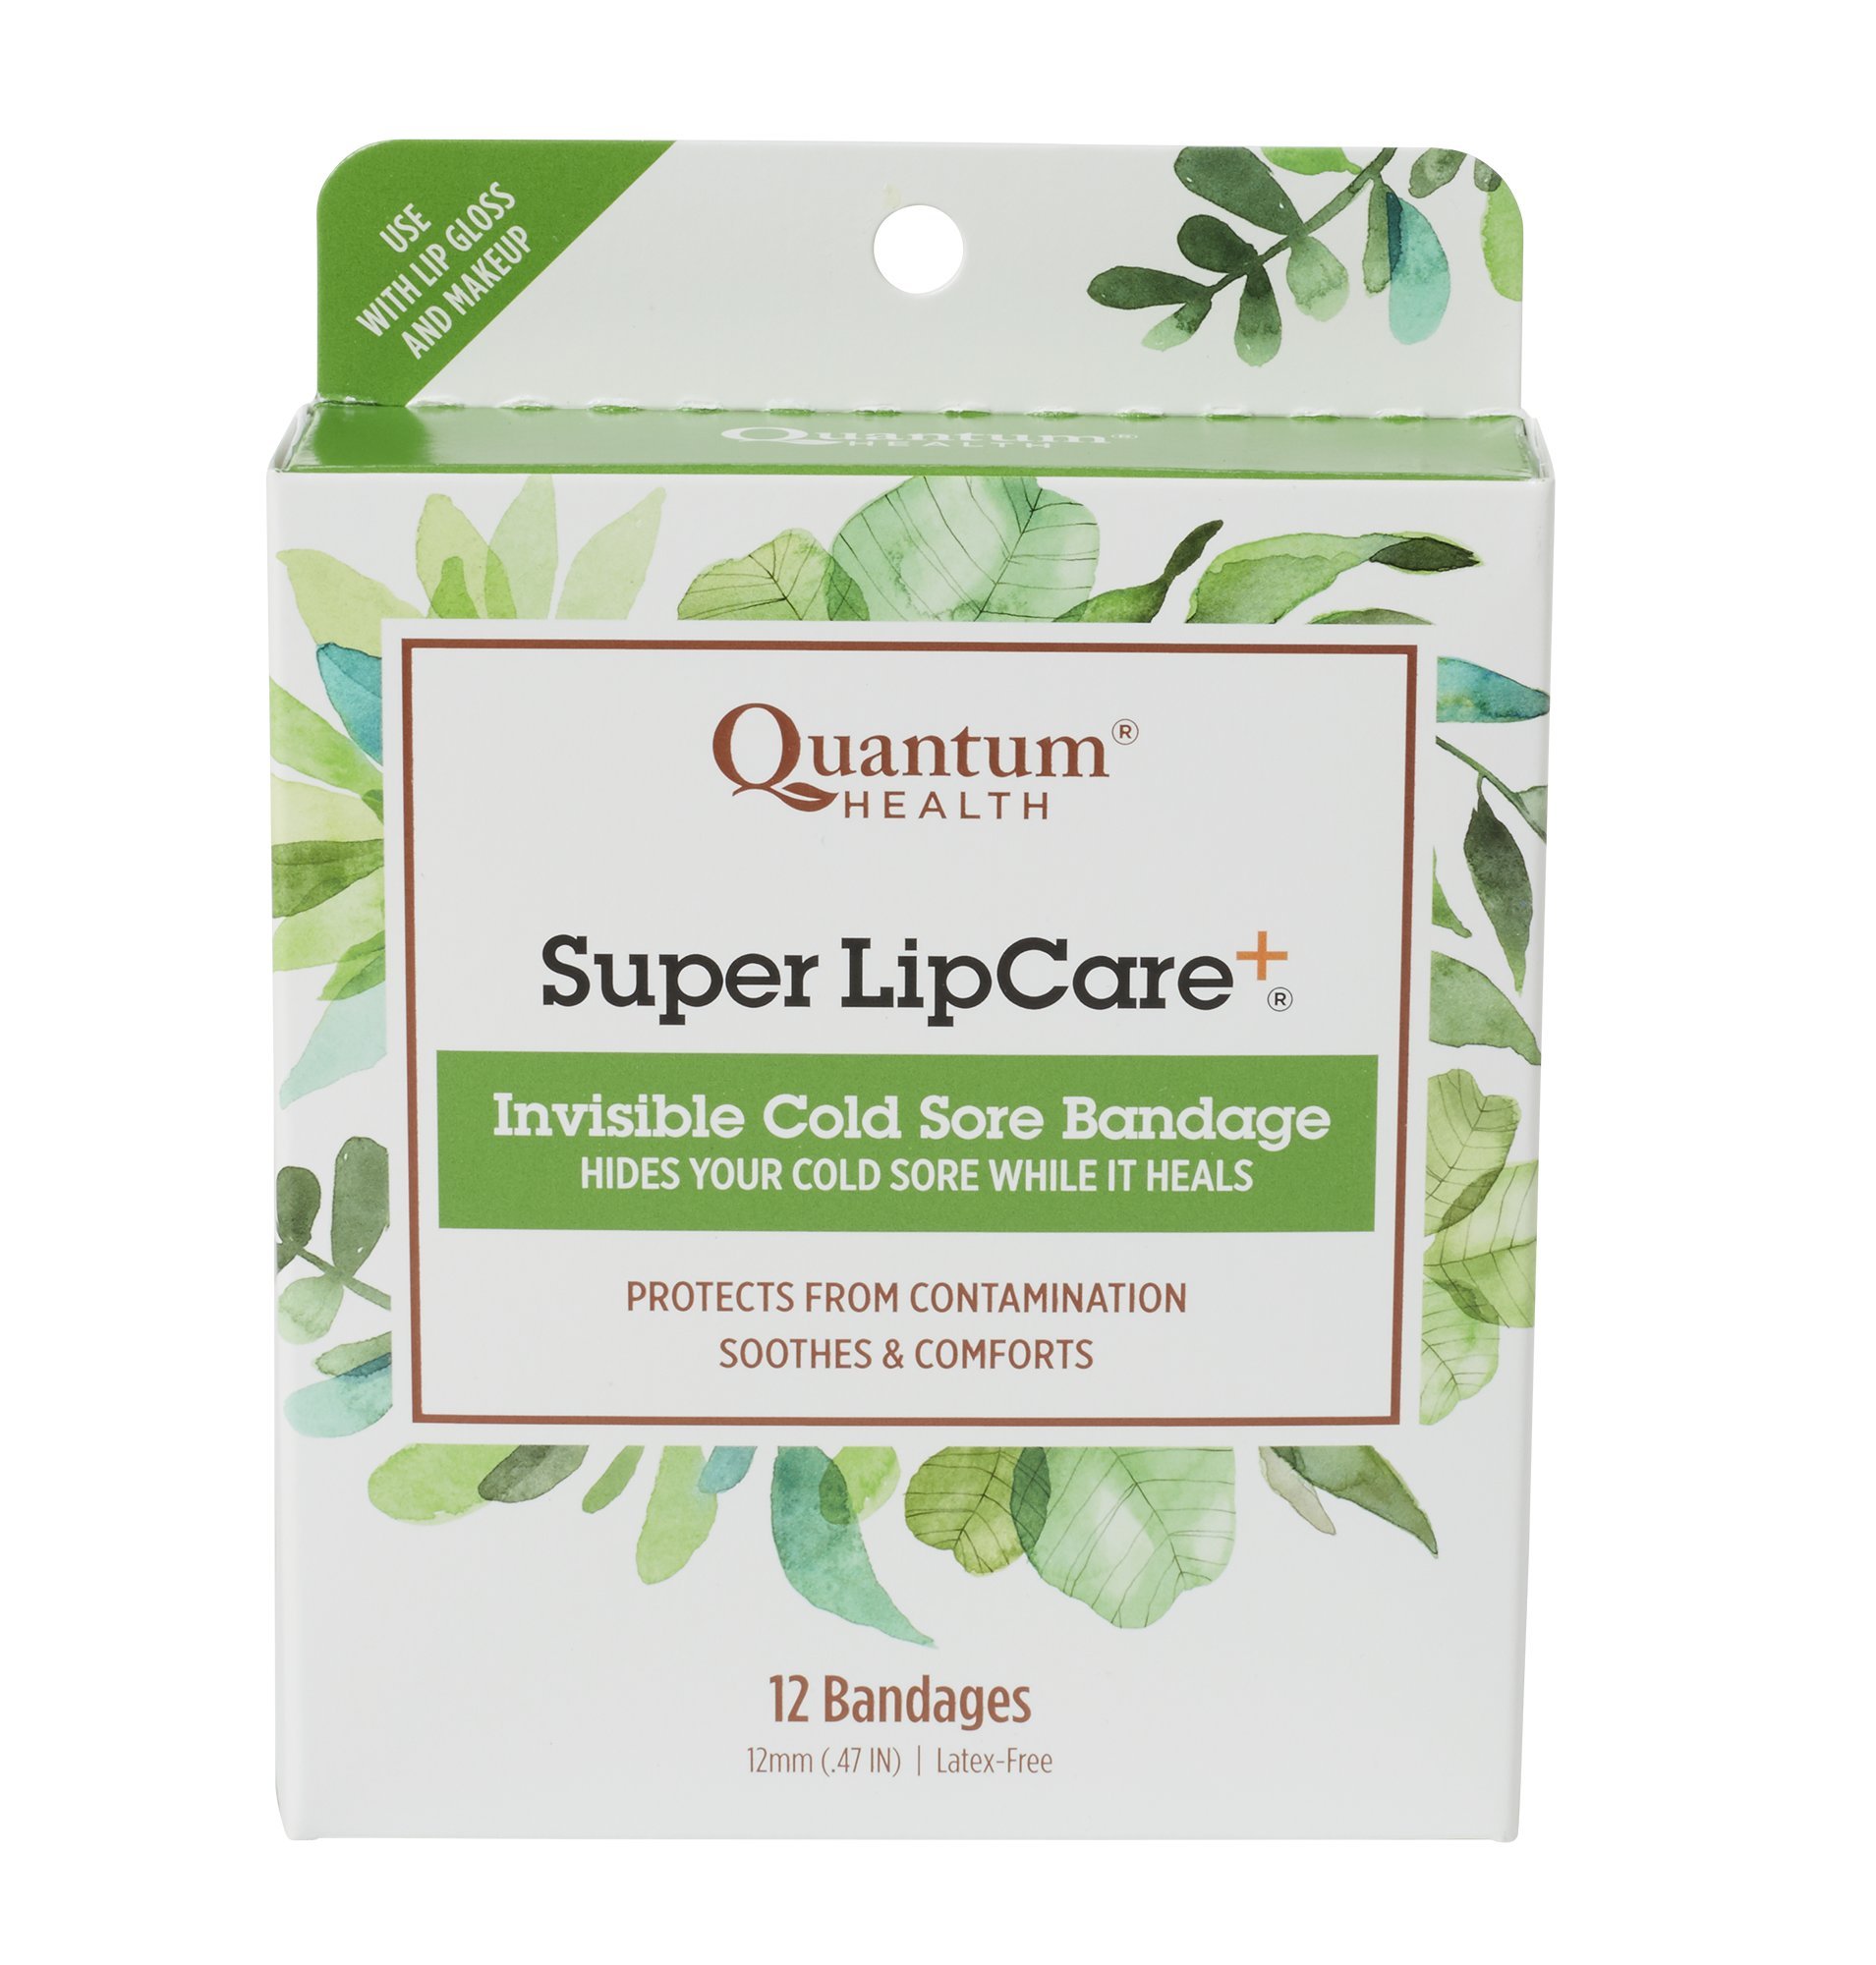 Quantum Health Super LipCare+ Invisible Cold Sore/Fever Blister Bandages - Soothes and Protects, Helps Prevent Contamination and Hide Sores, 12 Ct